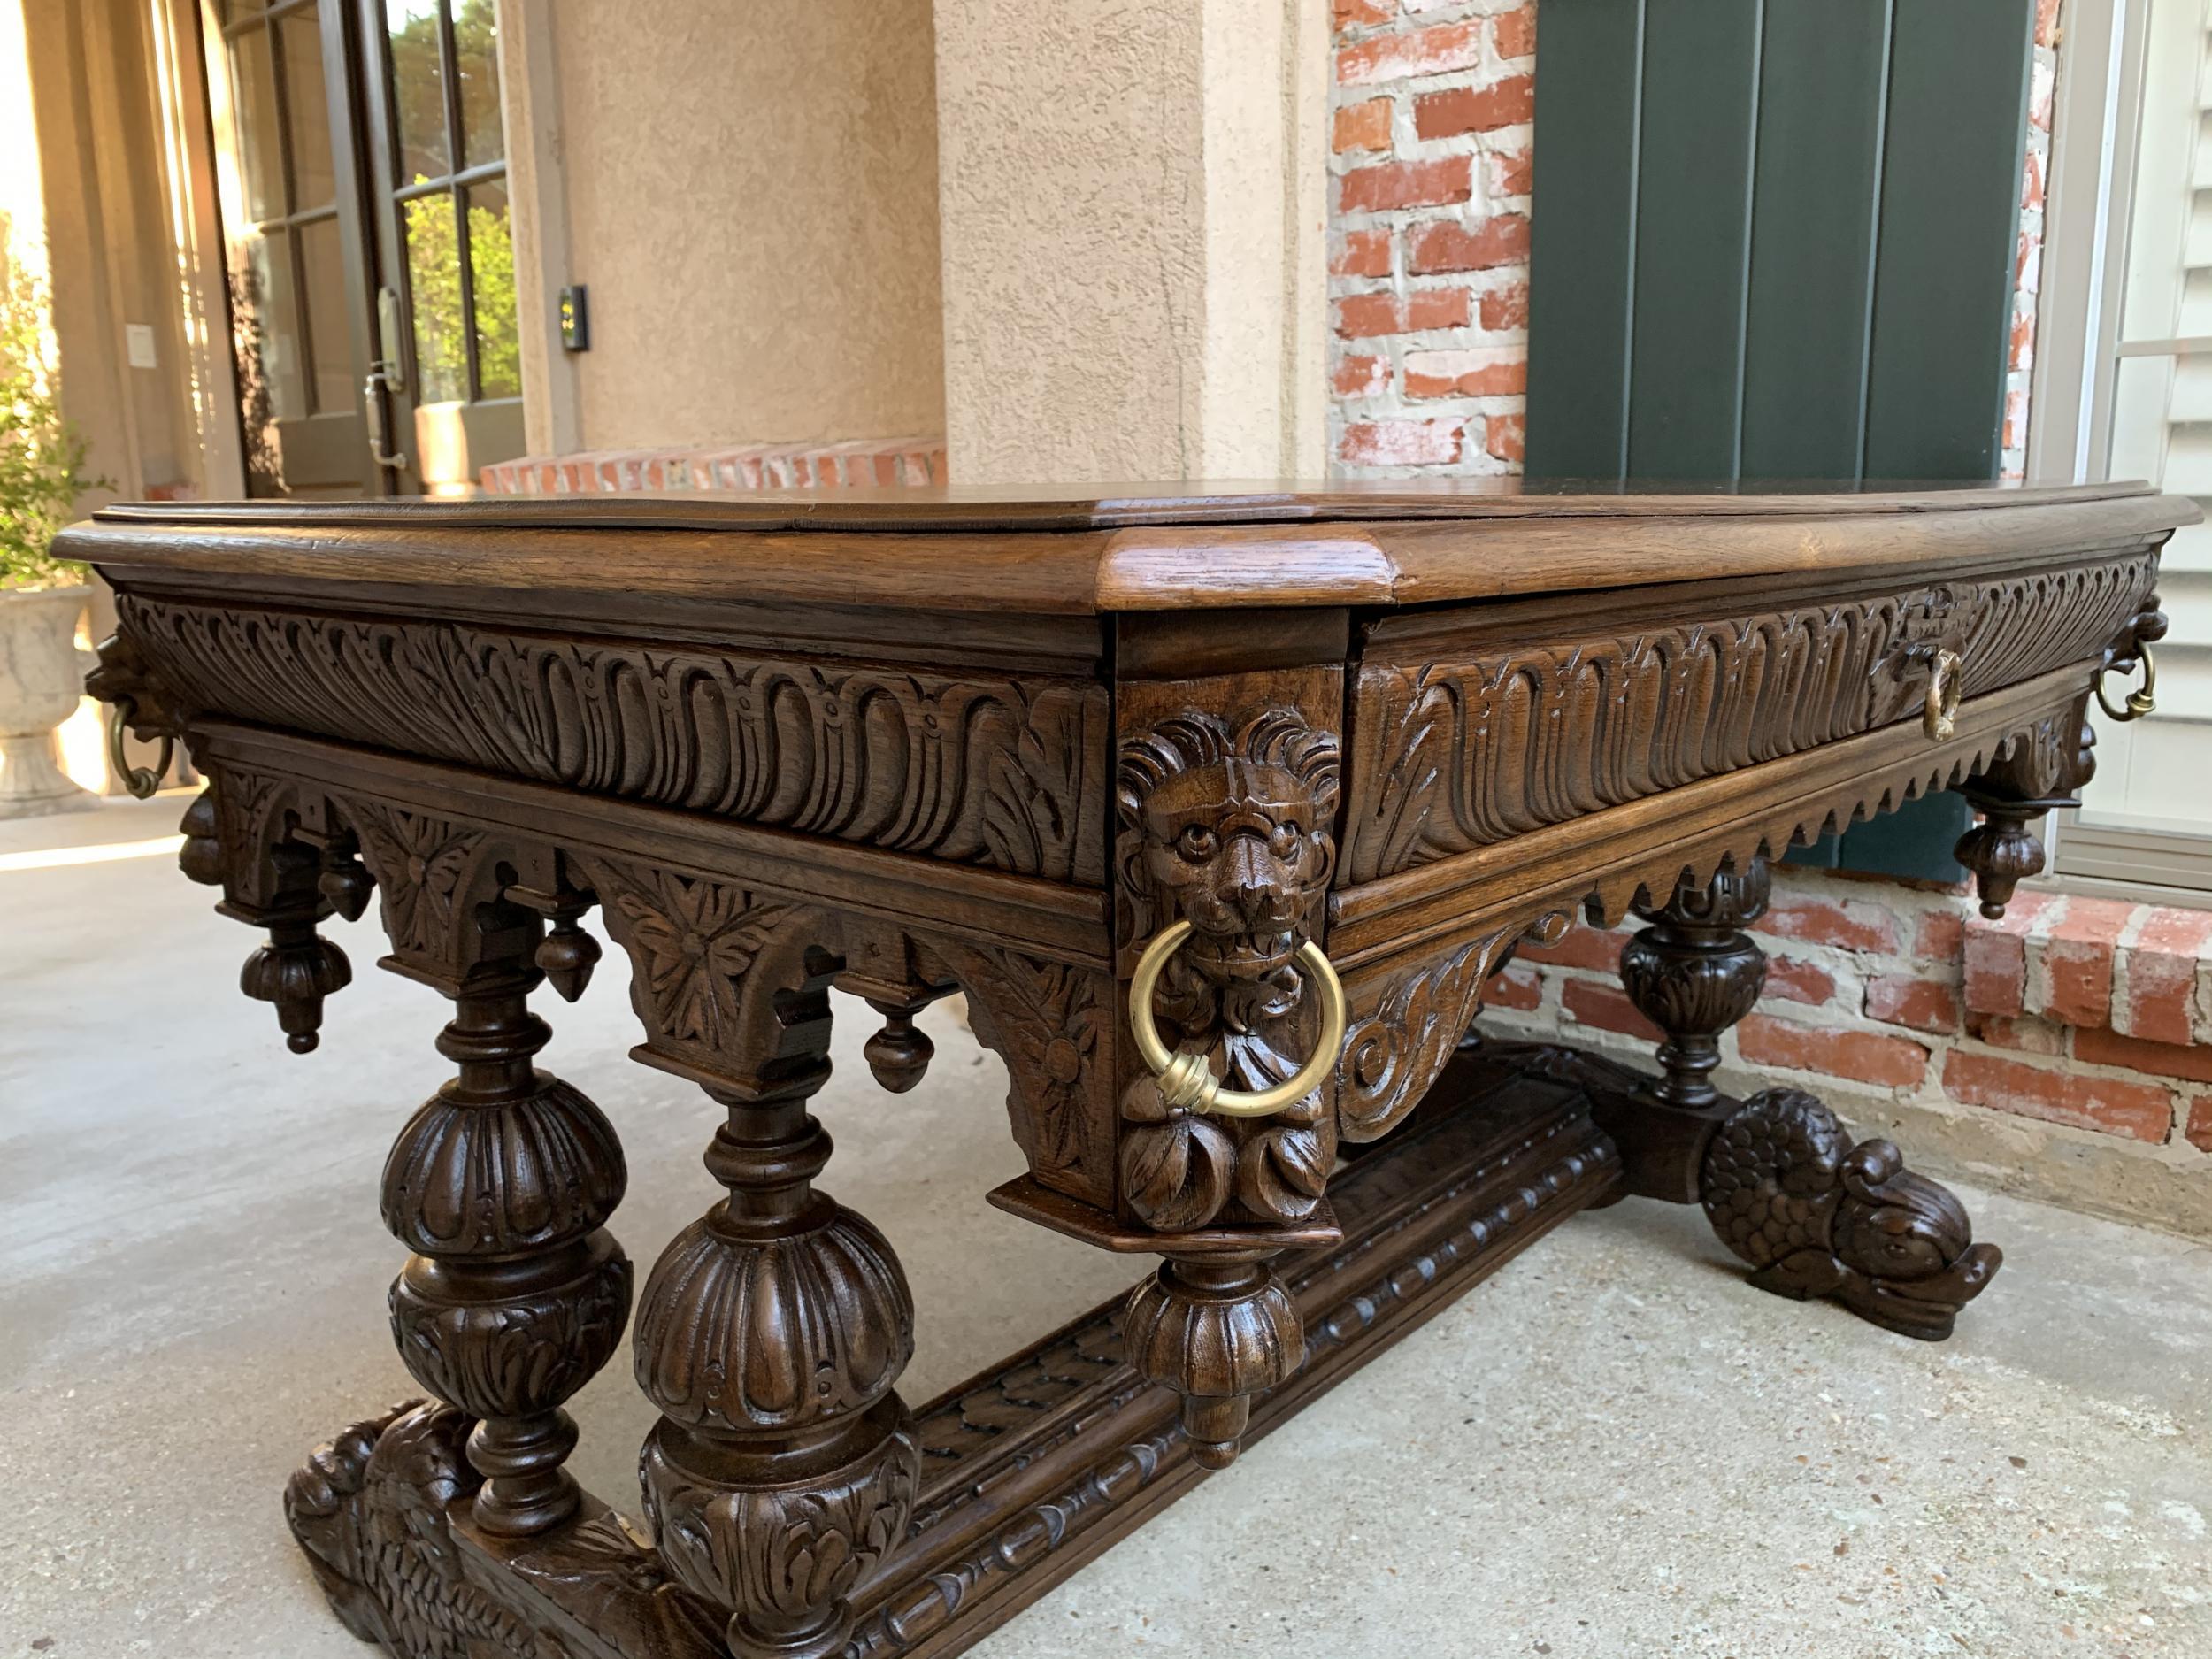 Renaissance Revival 19th Century French Carved Oak Dolphin Library Table Desk Renaissance Gothic